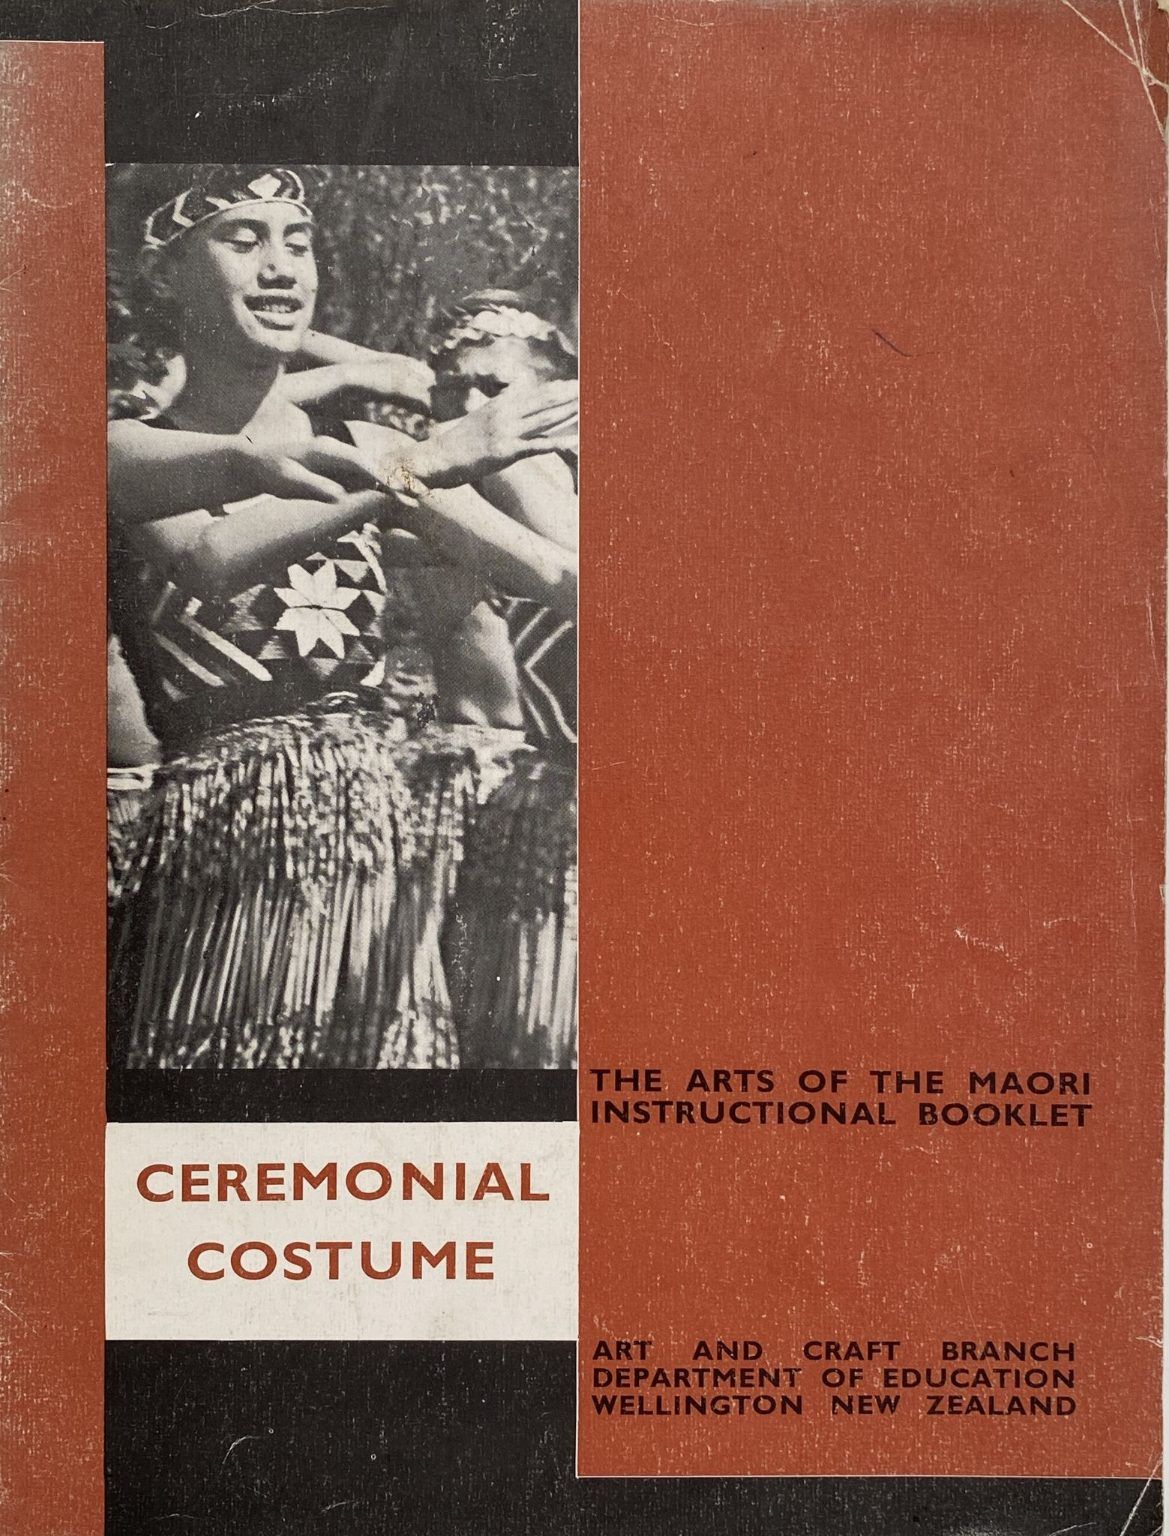 CEREMONIAL COSTUME: The Arts of the Maori Instructional Booklet